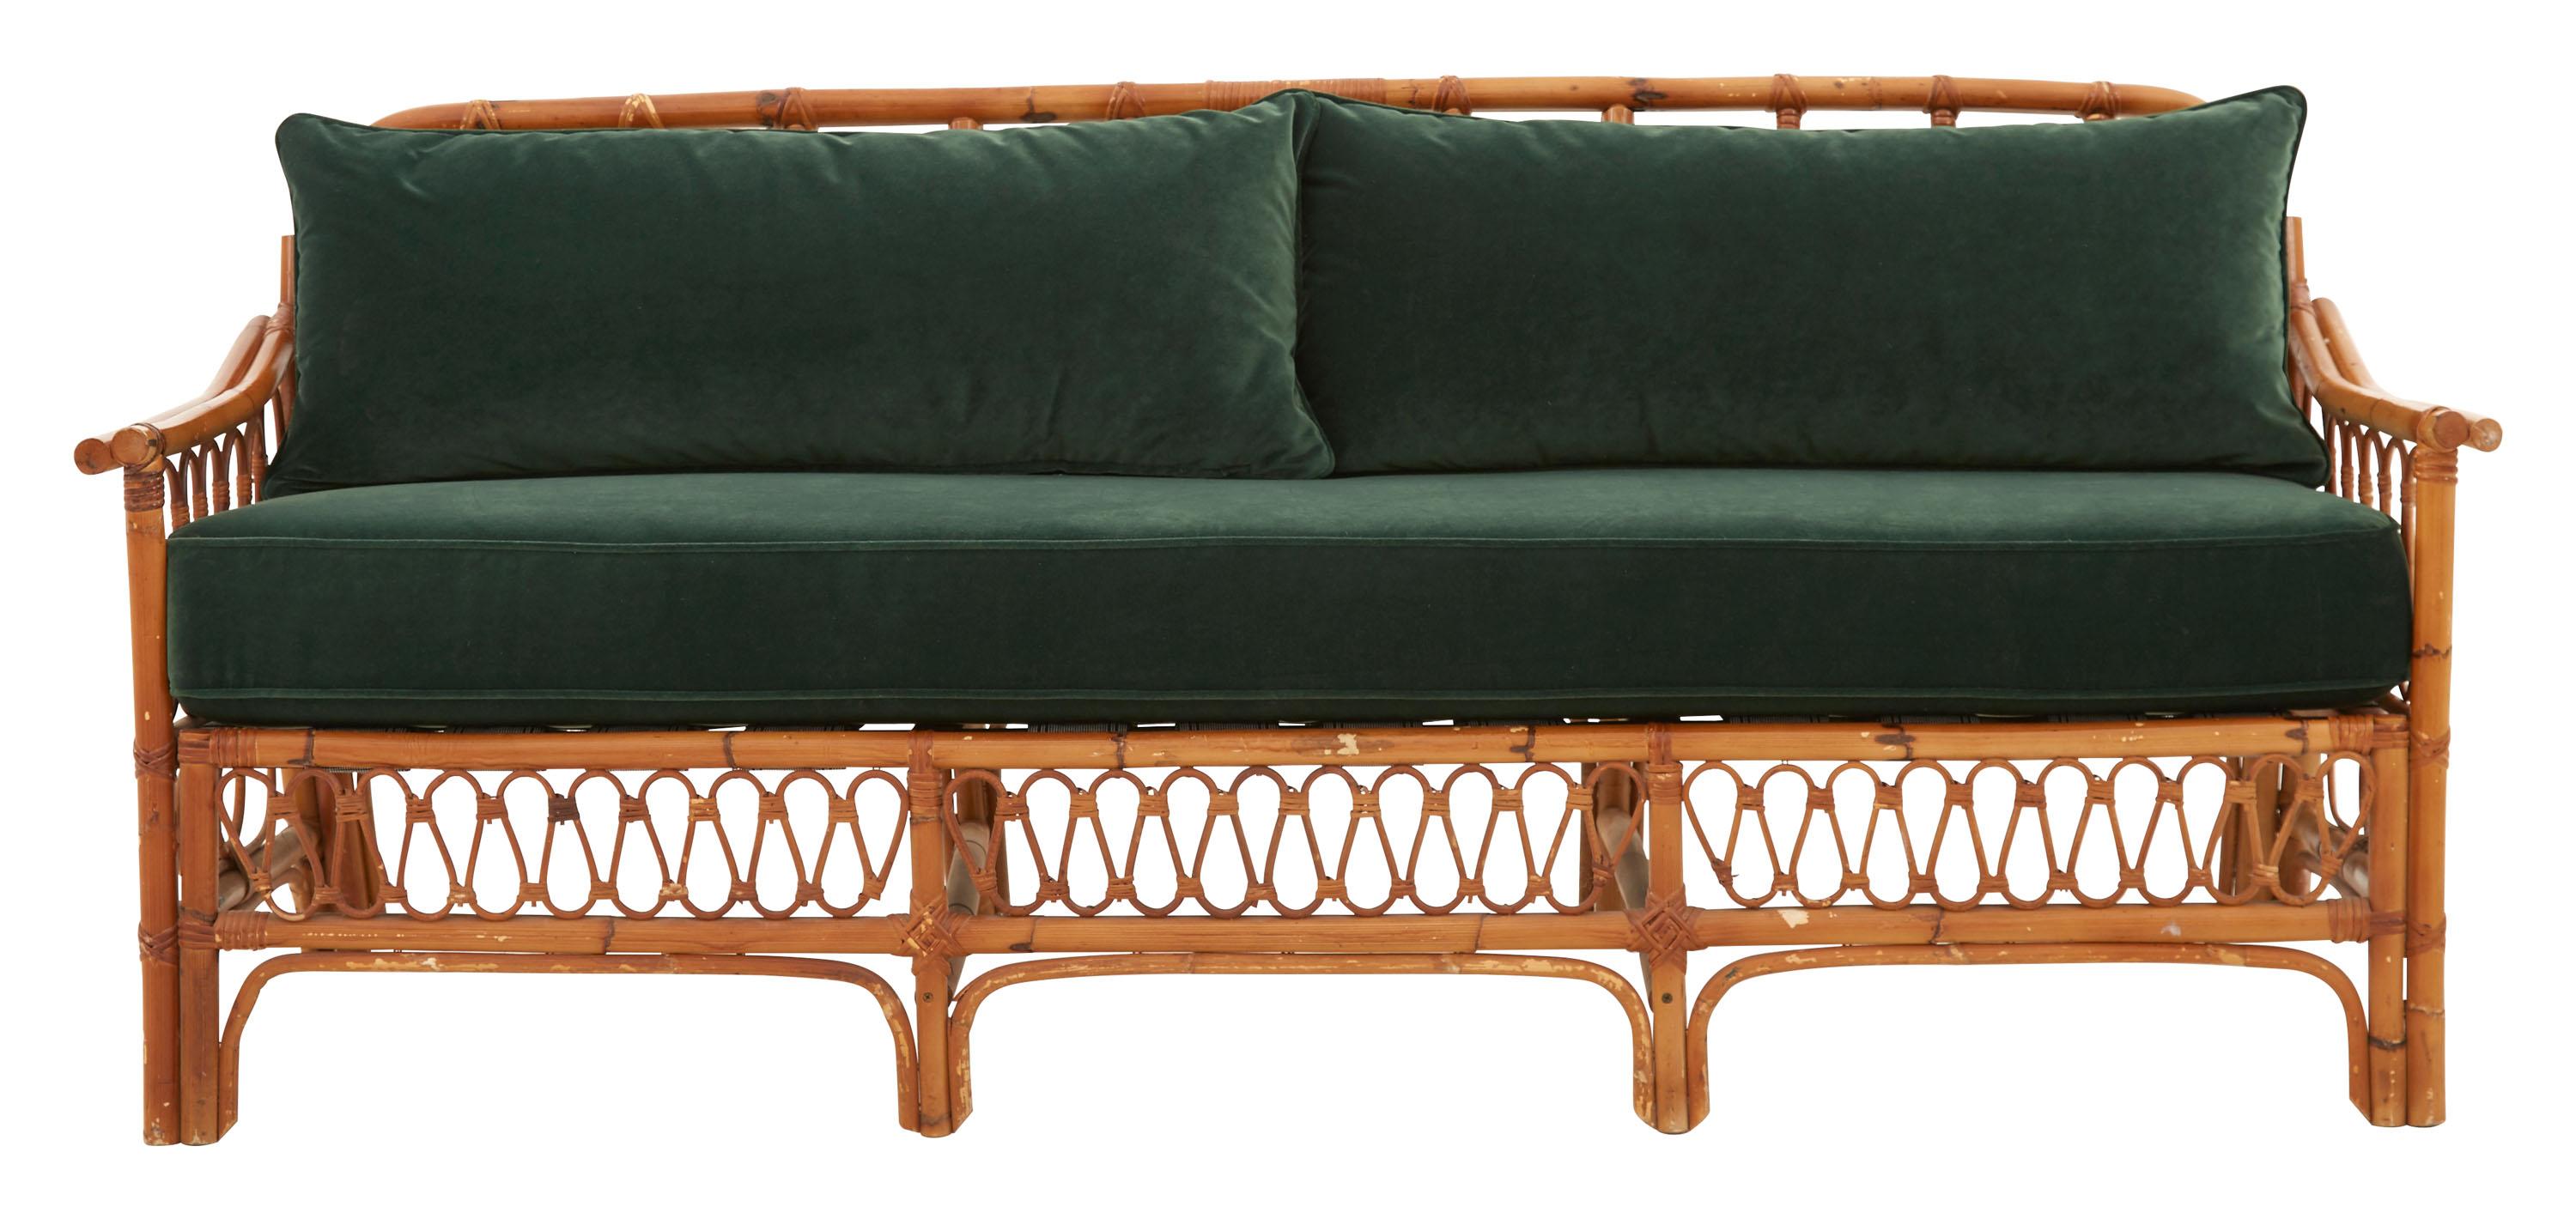 • Reupholstered in emerald velvet
• Down and feather back pillow
• Rattan and bamboo frame
• Mid-20th century
• Spain

Dimensions:
• 73.5